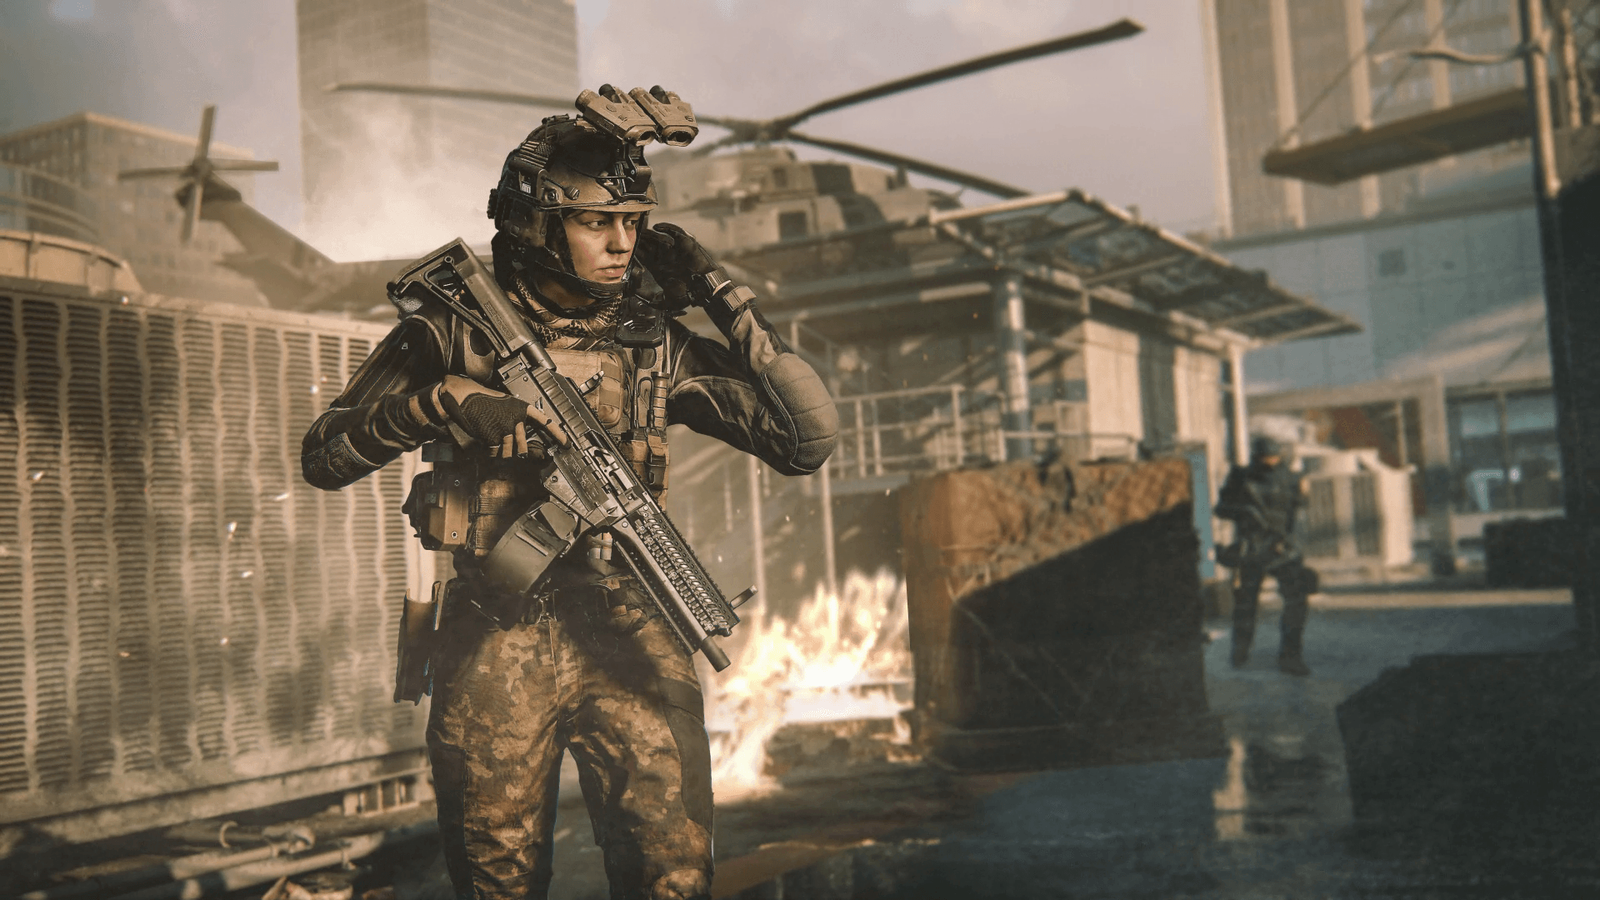 Modern Warfare 3 holding gun and raising hand to helmet with opponent and care package in background